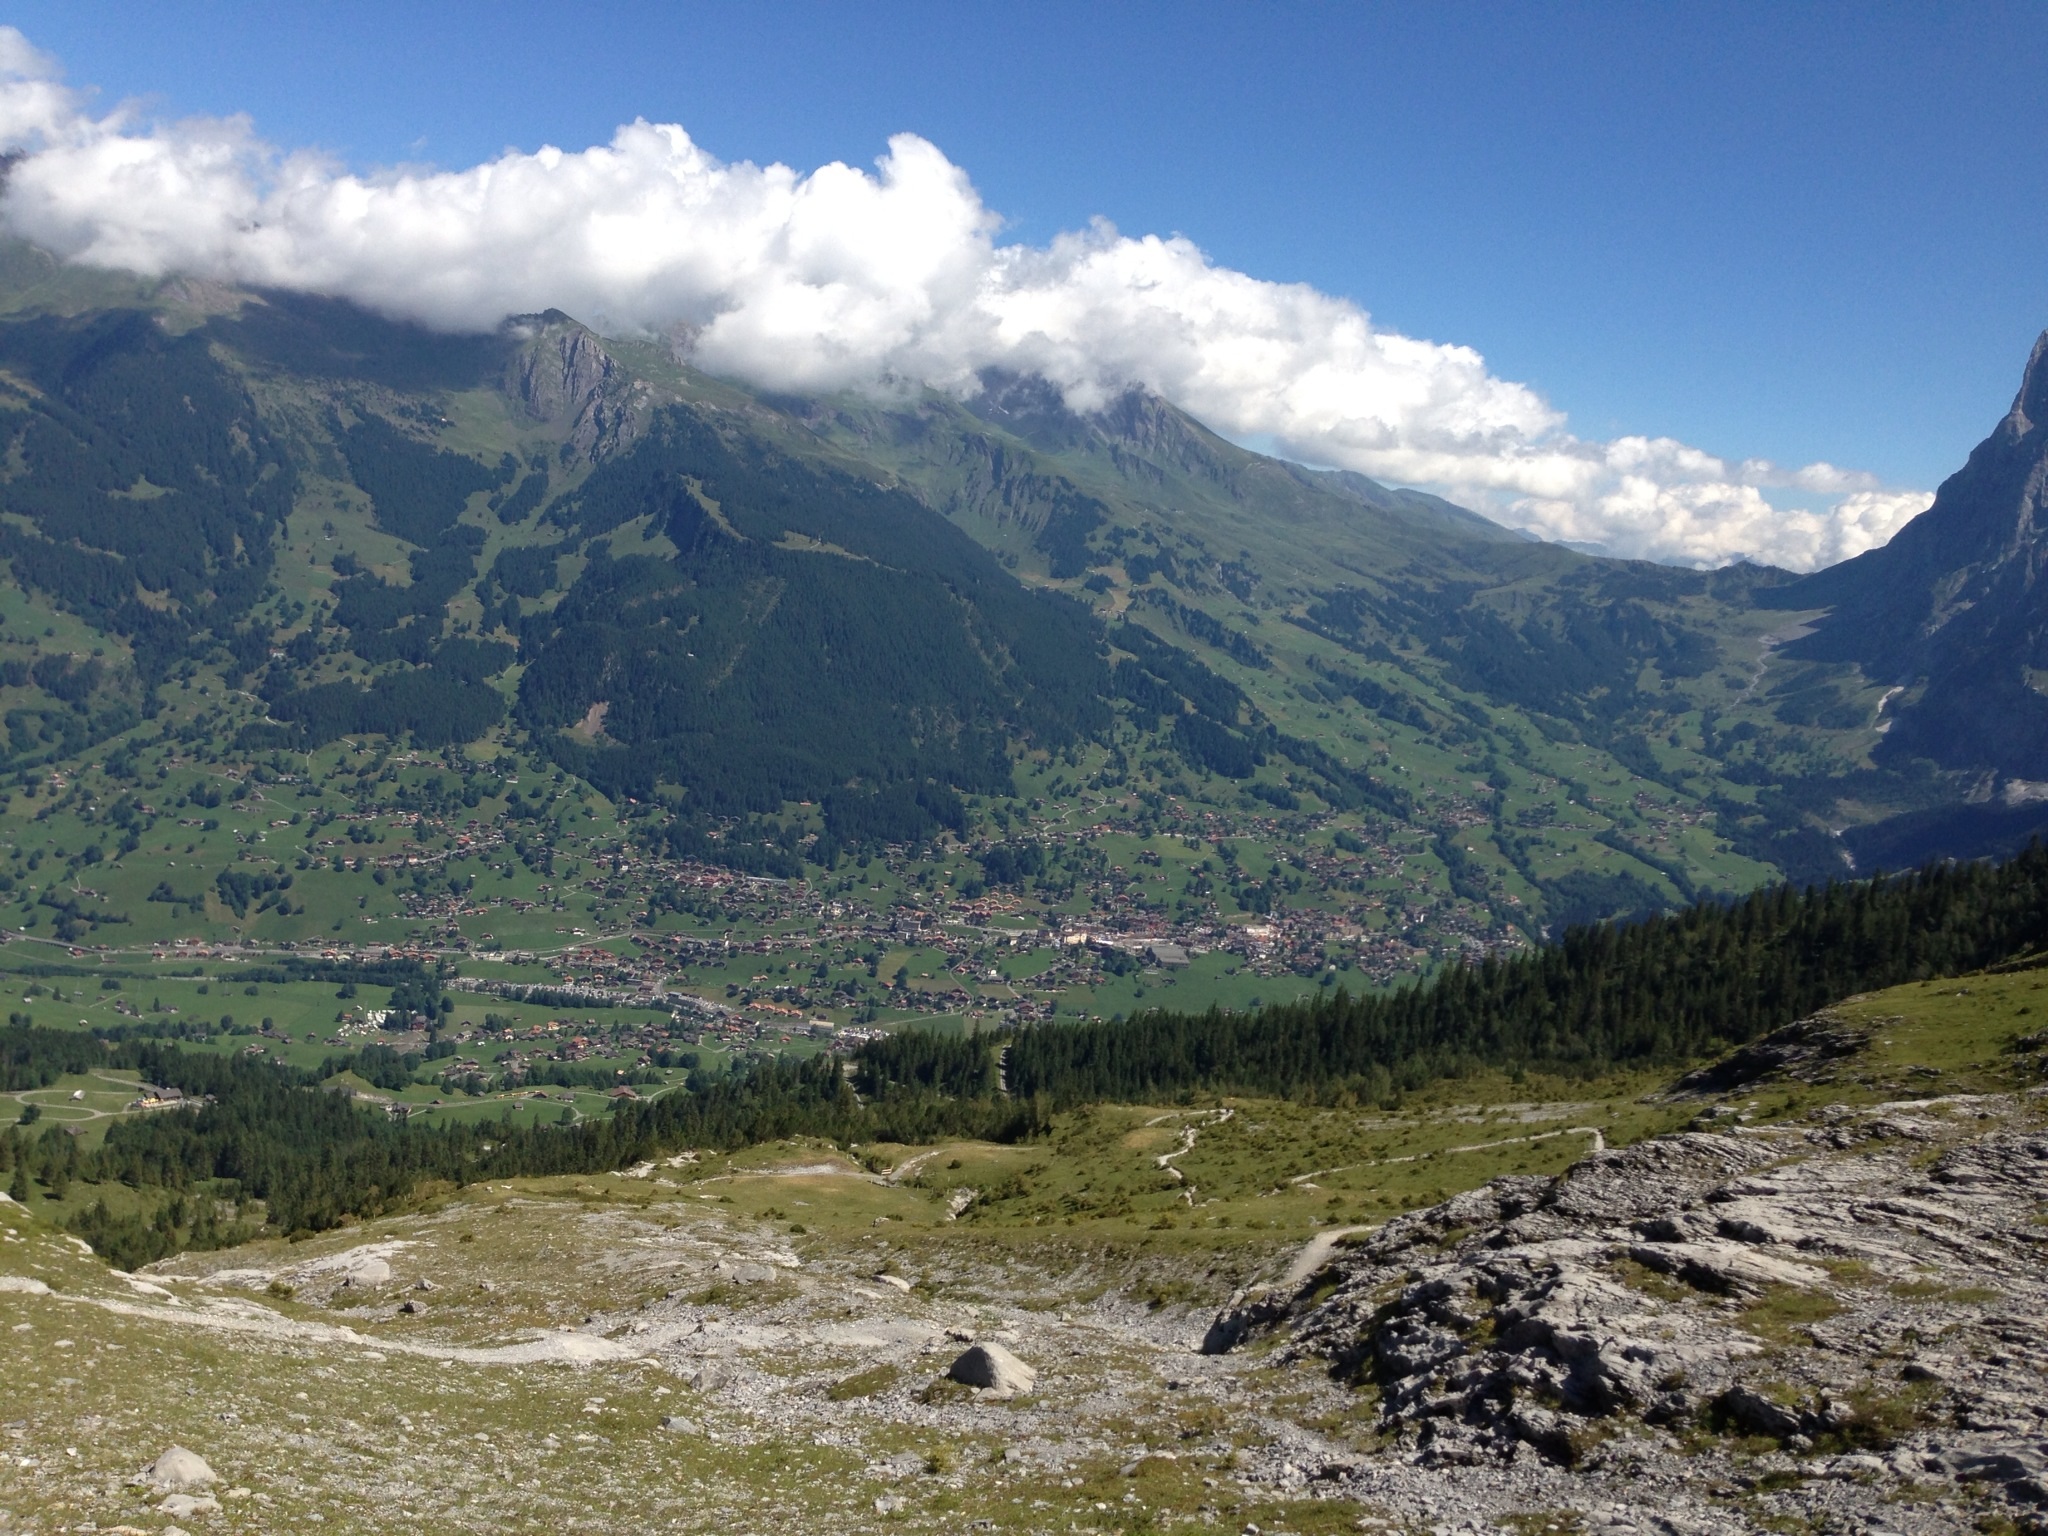 Looking down to Grindelwald from the Eiger trail